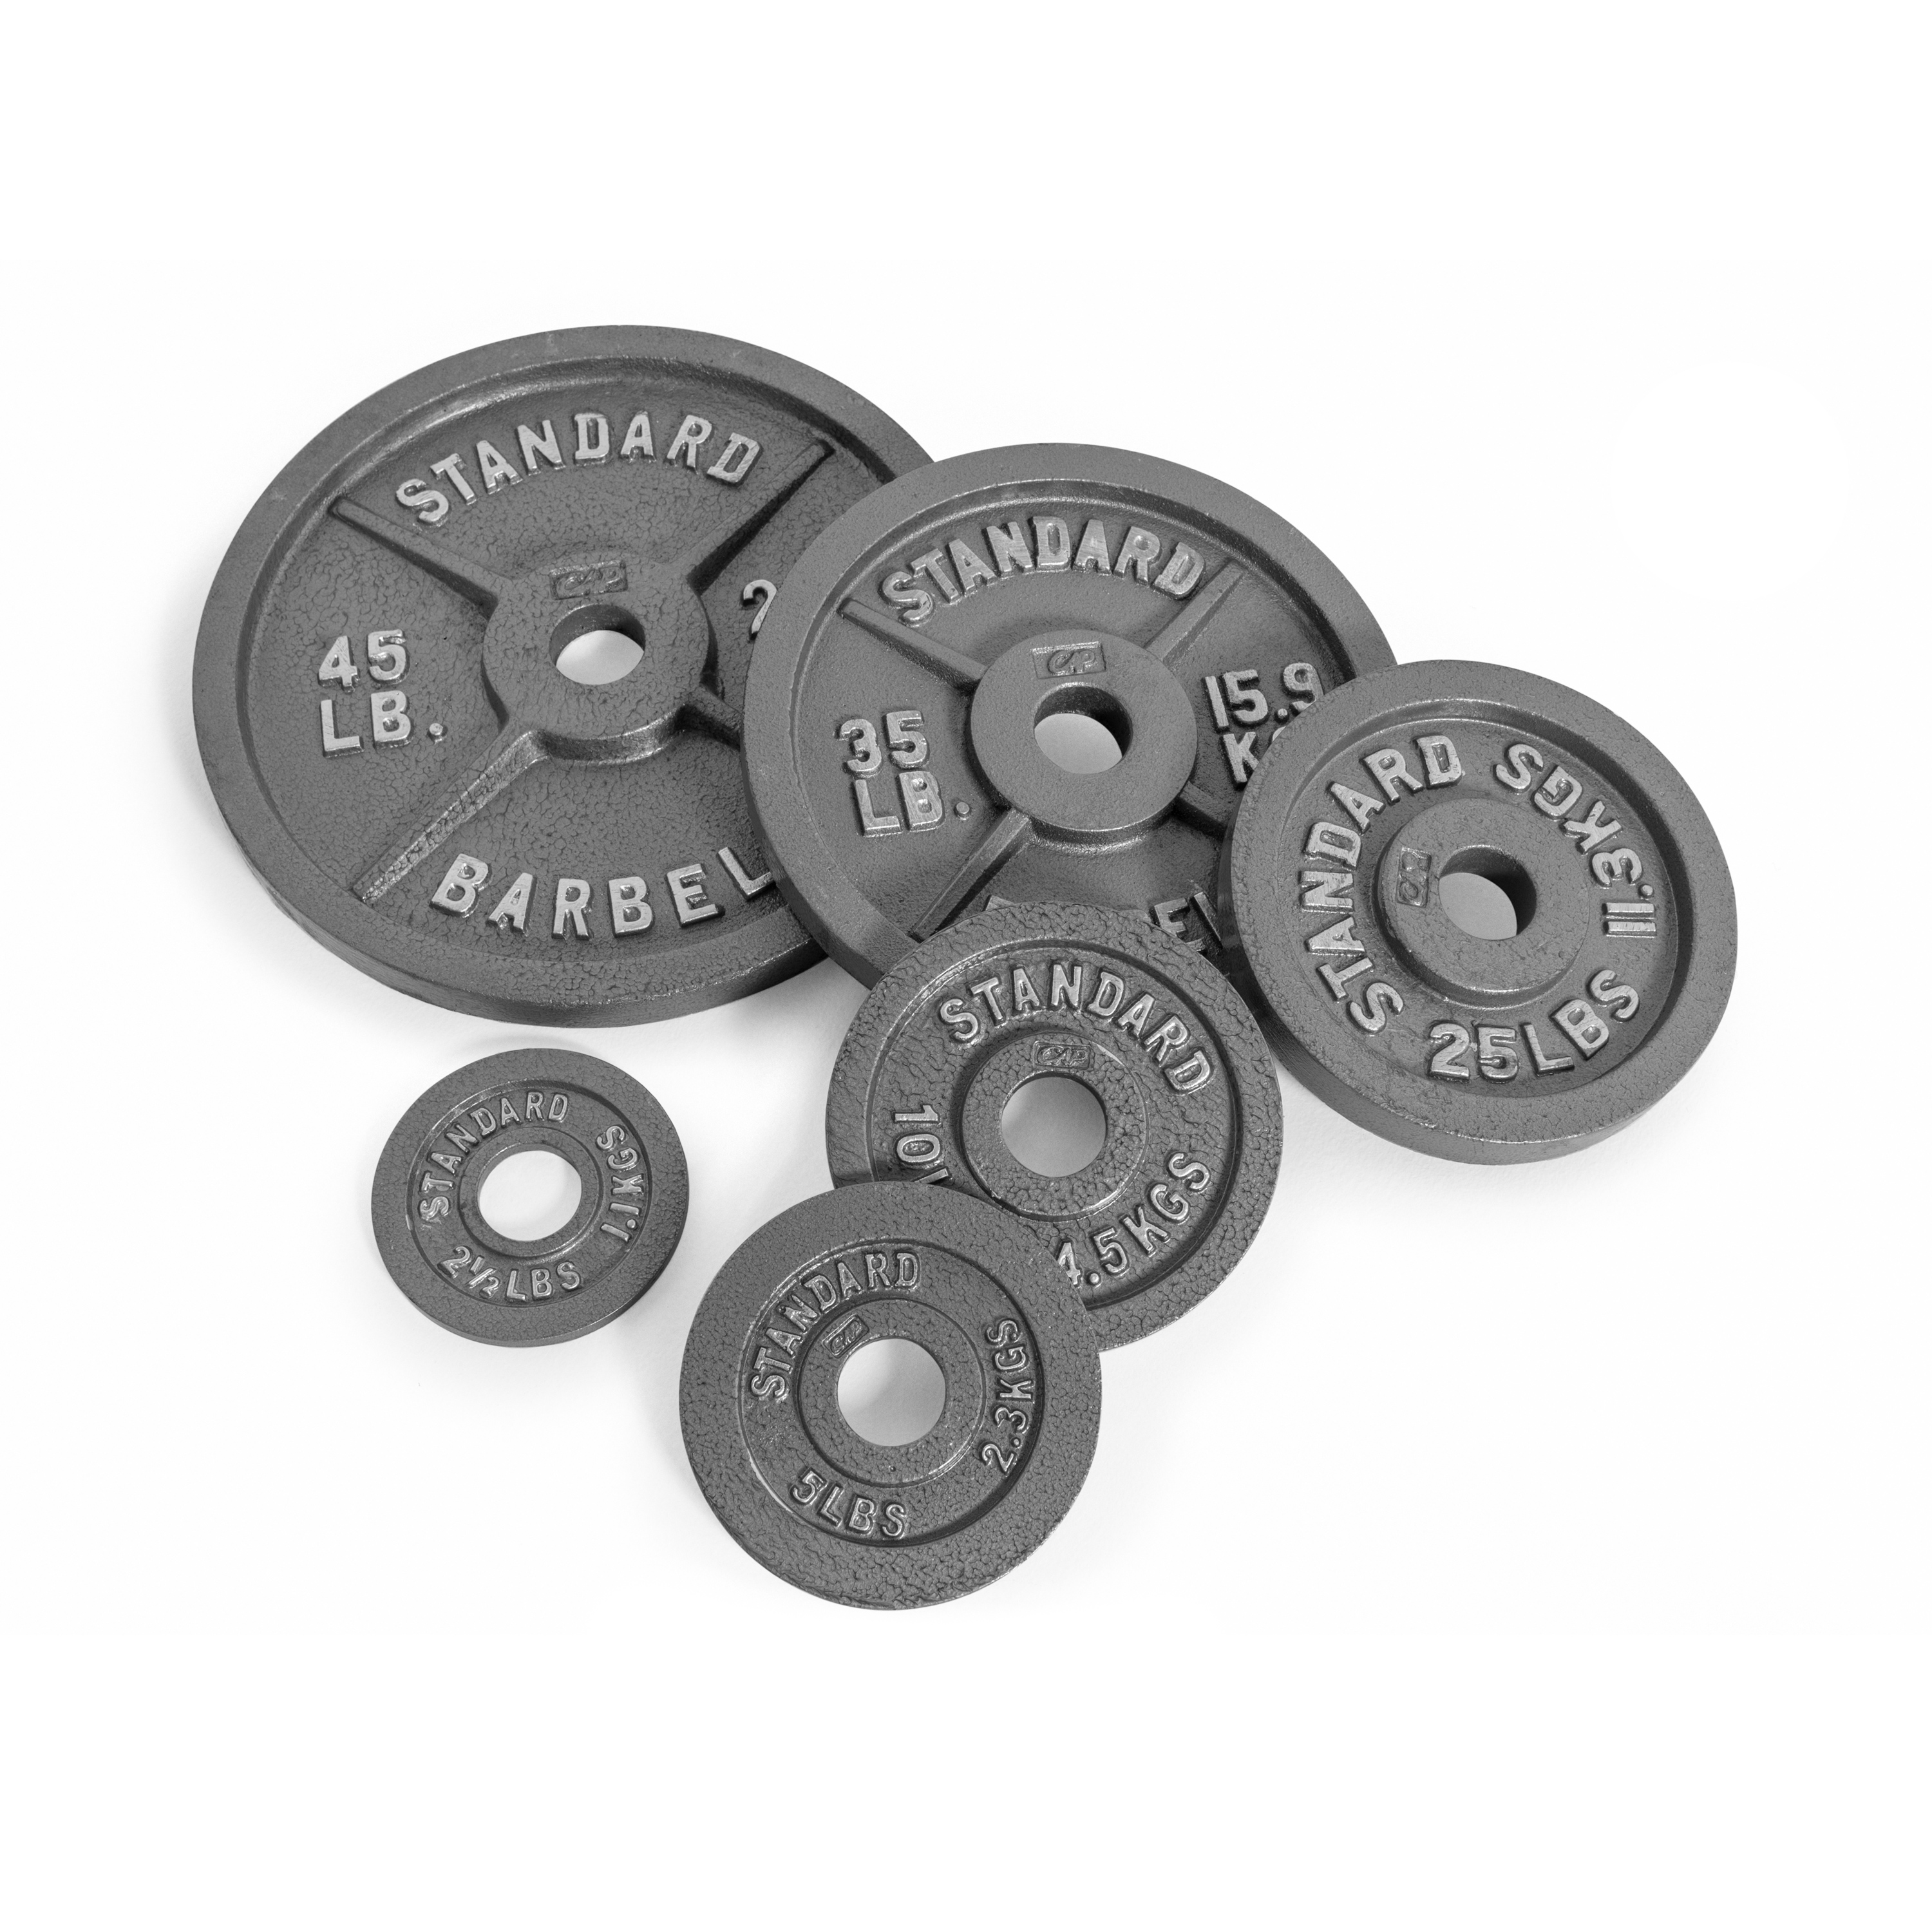 CAP Barbell Gray Olympic Cast Iron Weight Plate, 45 lb - image 2 of 2